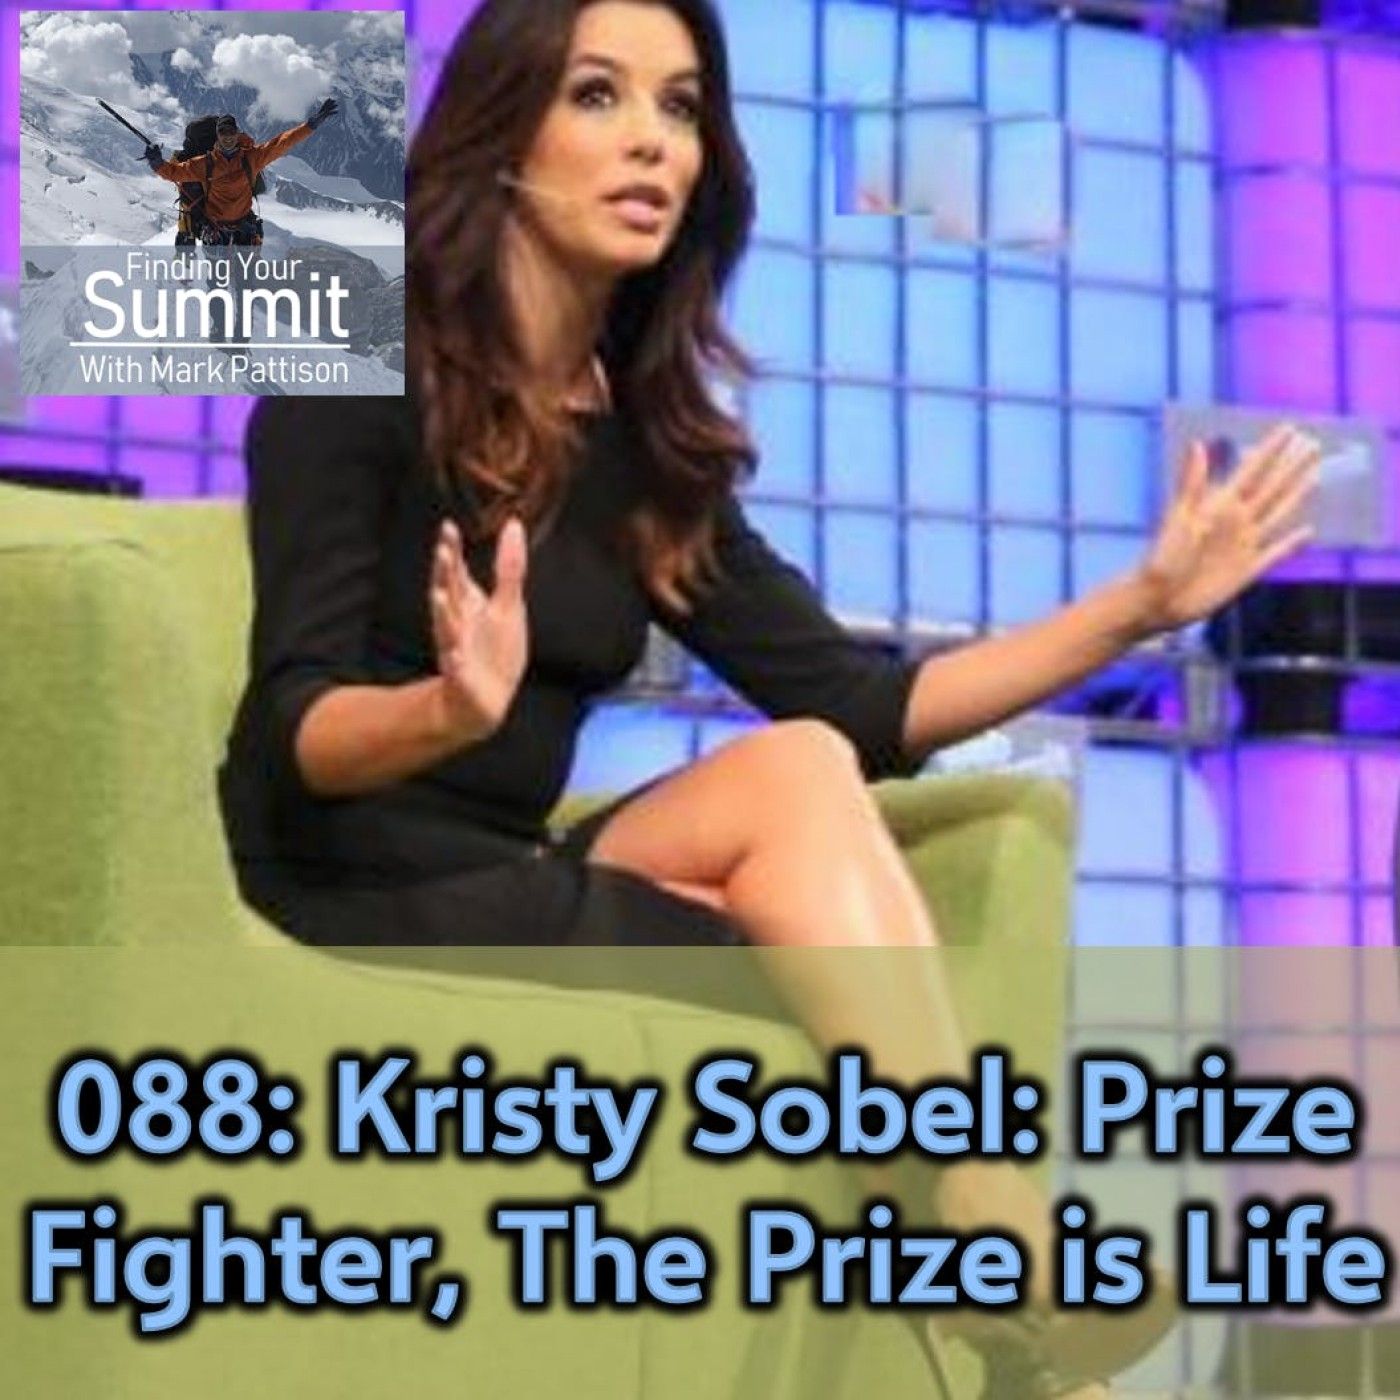 Kristy Sobel - Prize Fighter, The Prize is Life